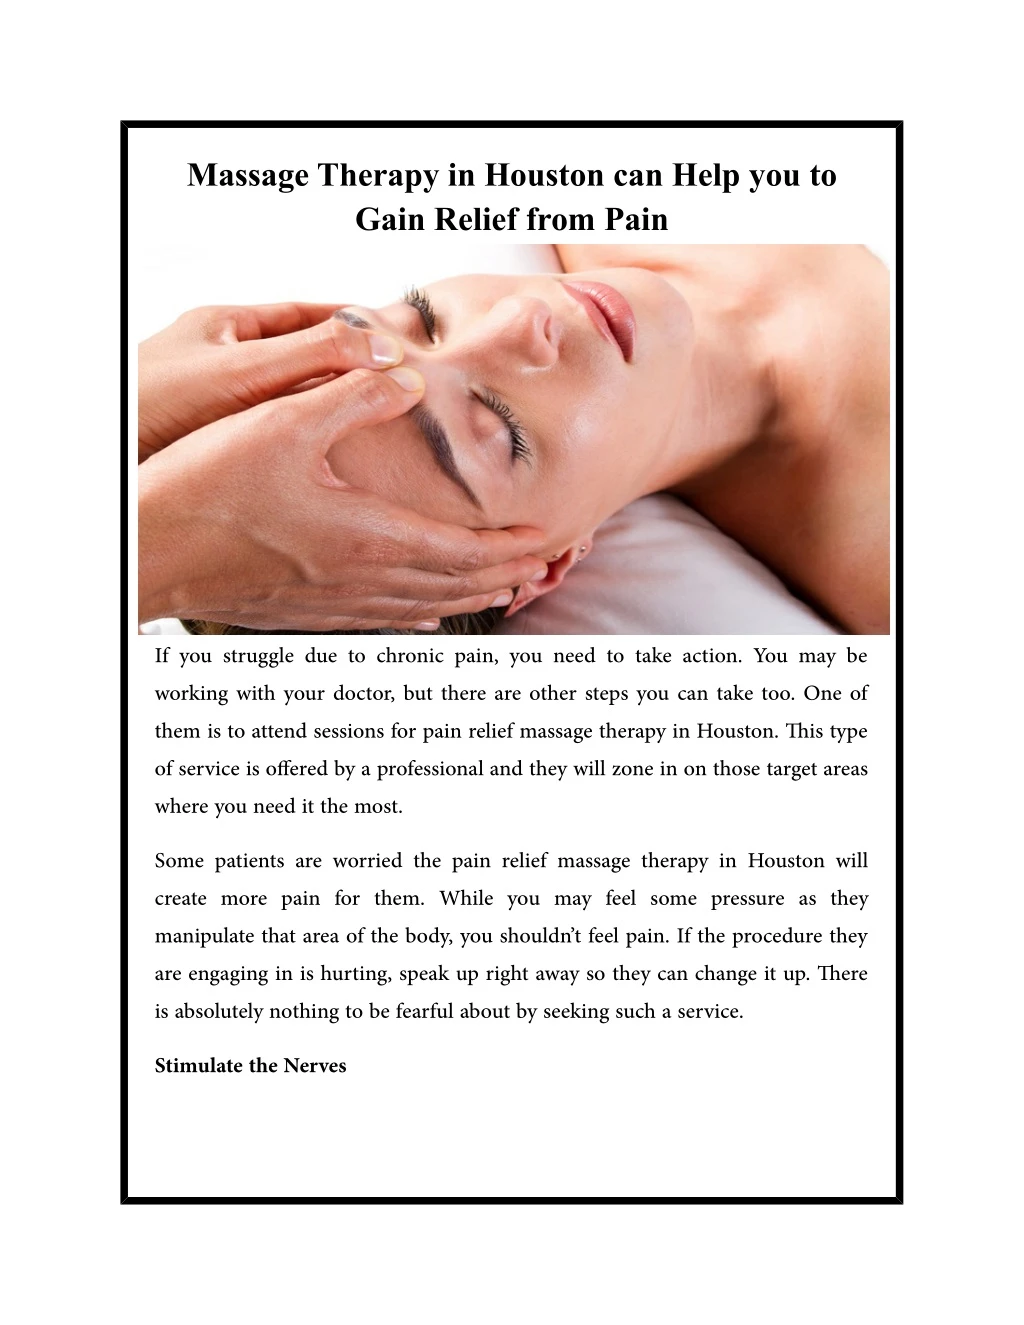 massage therapy in houston can help you to gain